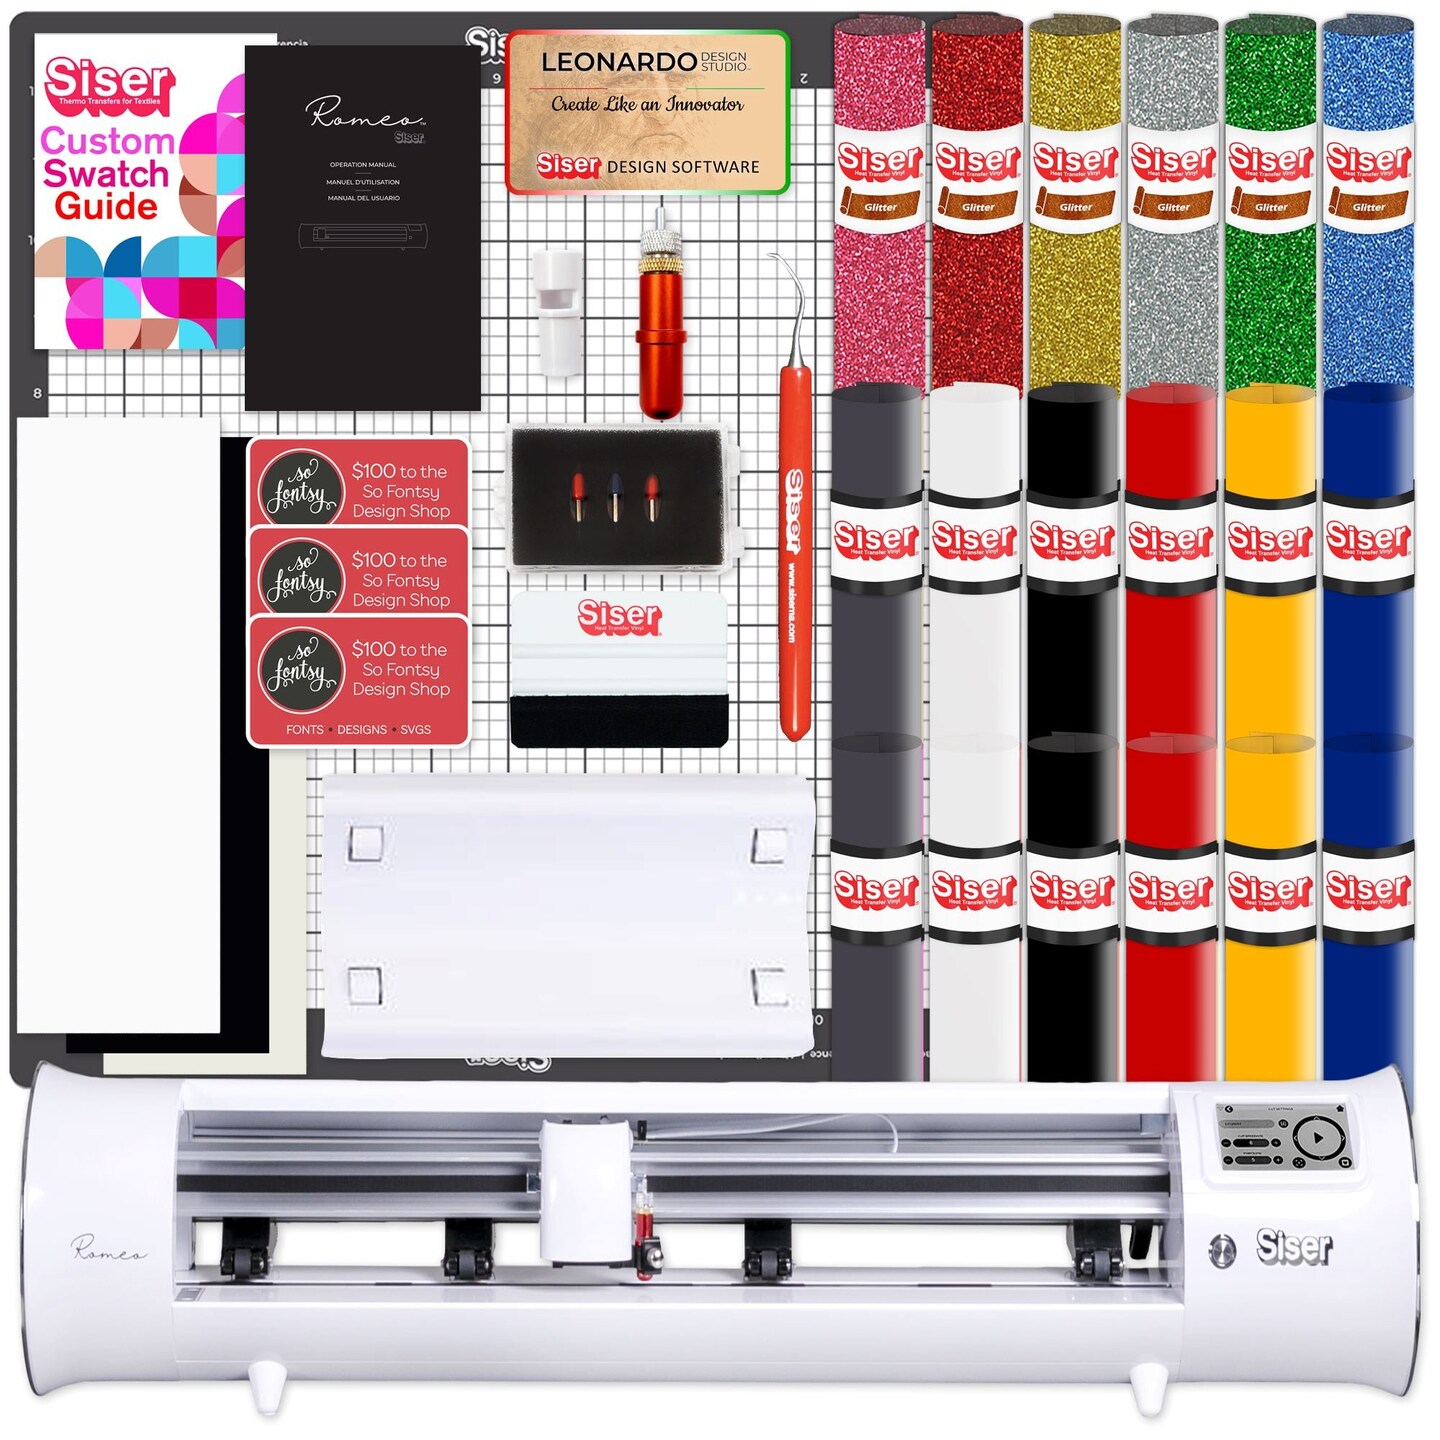 Siser Juliet 12 Vinyl Cutter Bundle with Siser Easyweed HTV and Heat T